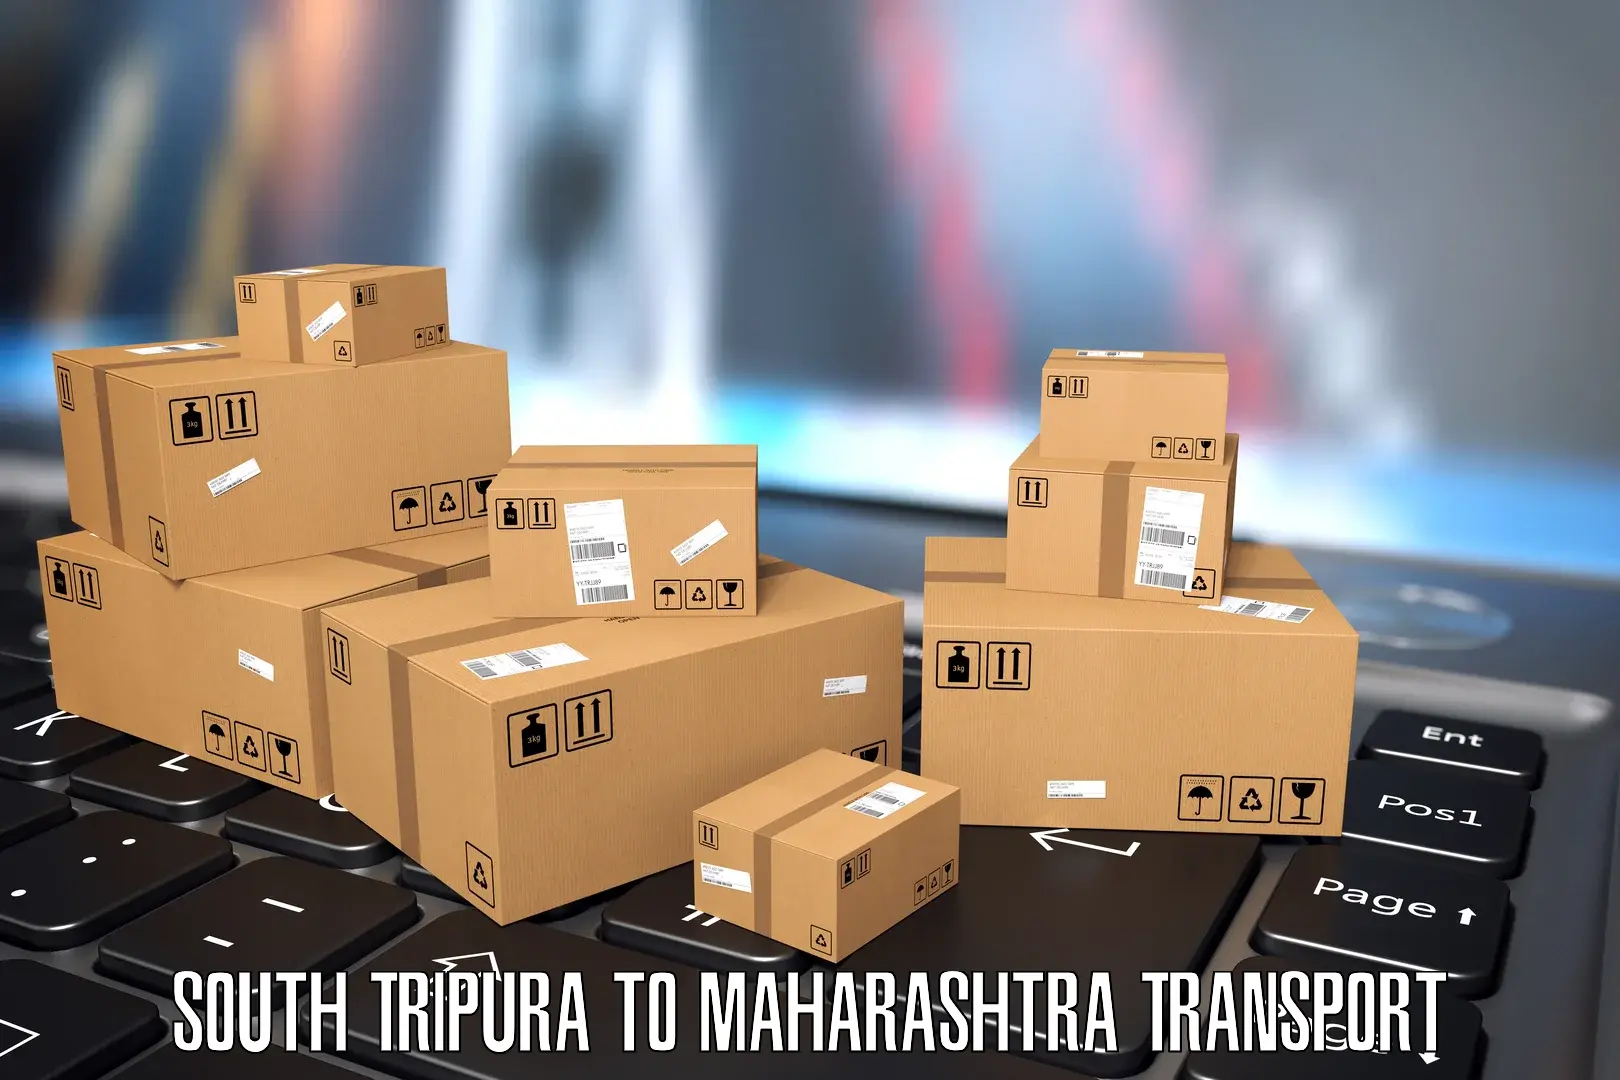 Air freight transport services South Tripura to Chandrapur